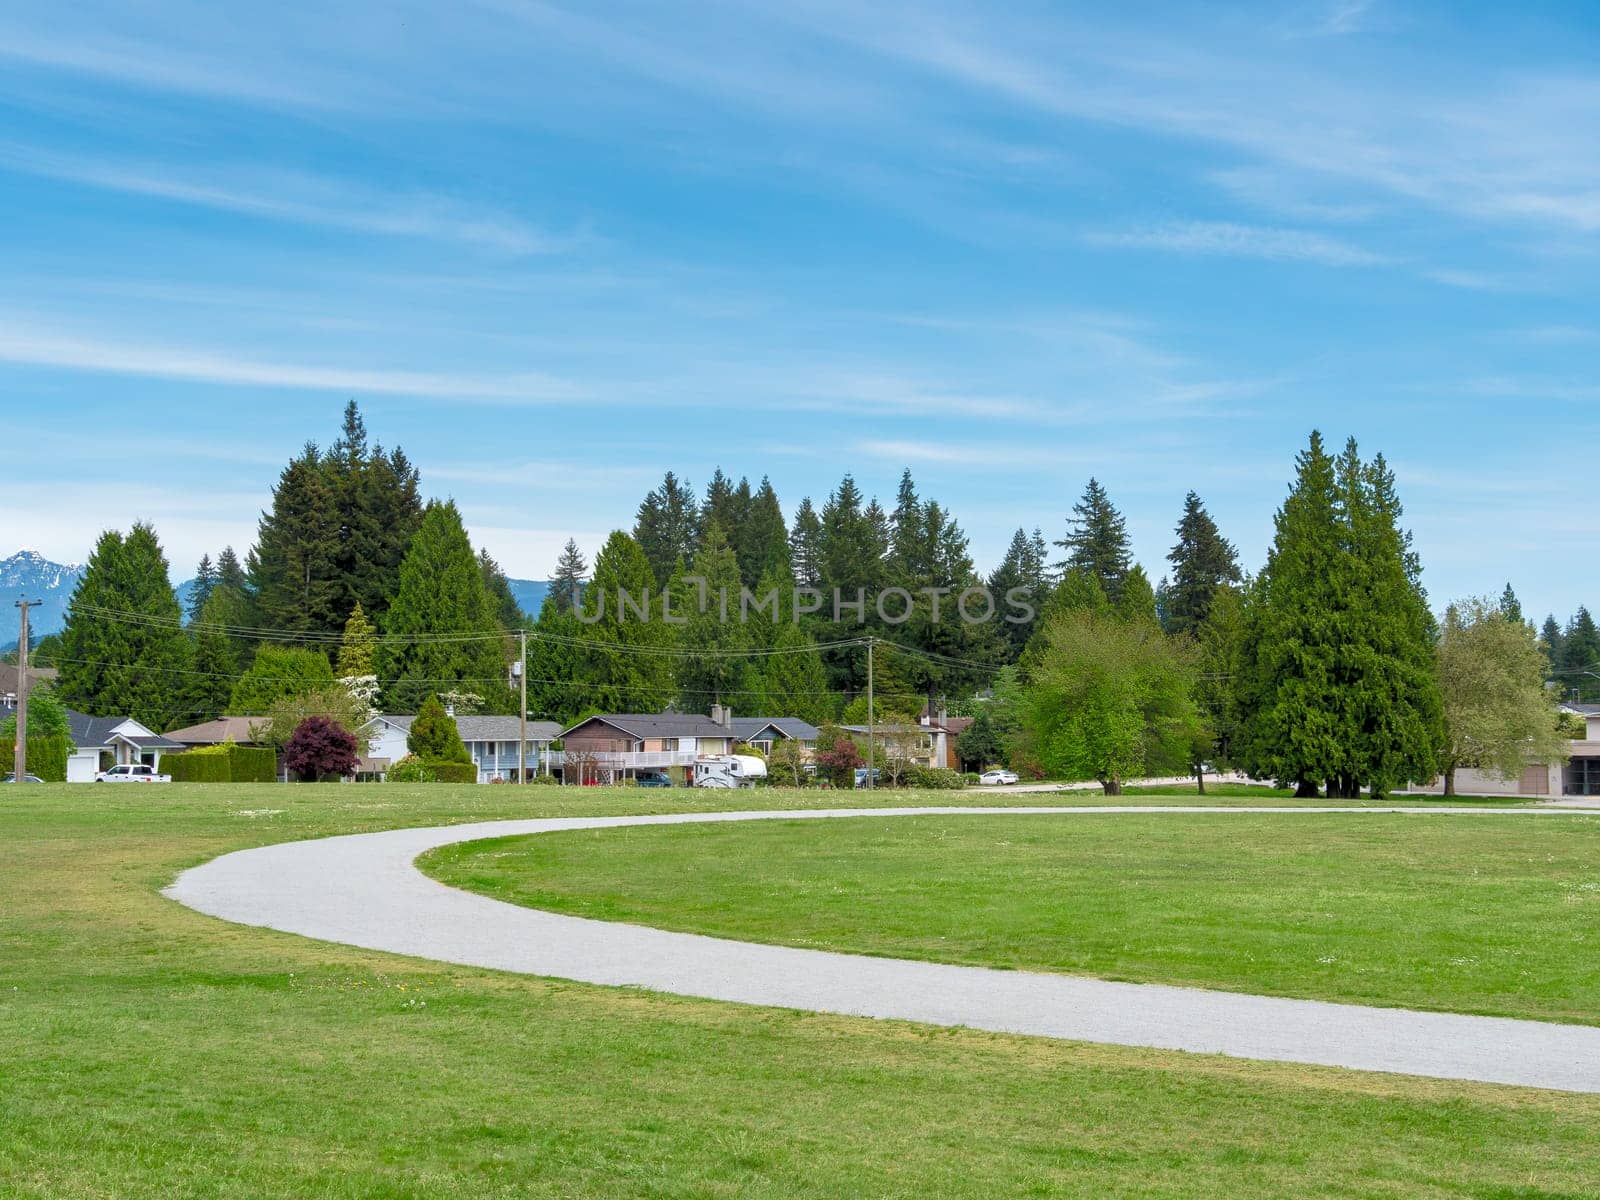 Gravel jogging track in recreational park in residential are of Vancouver, Canada.